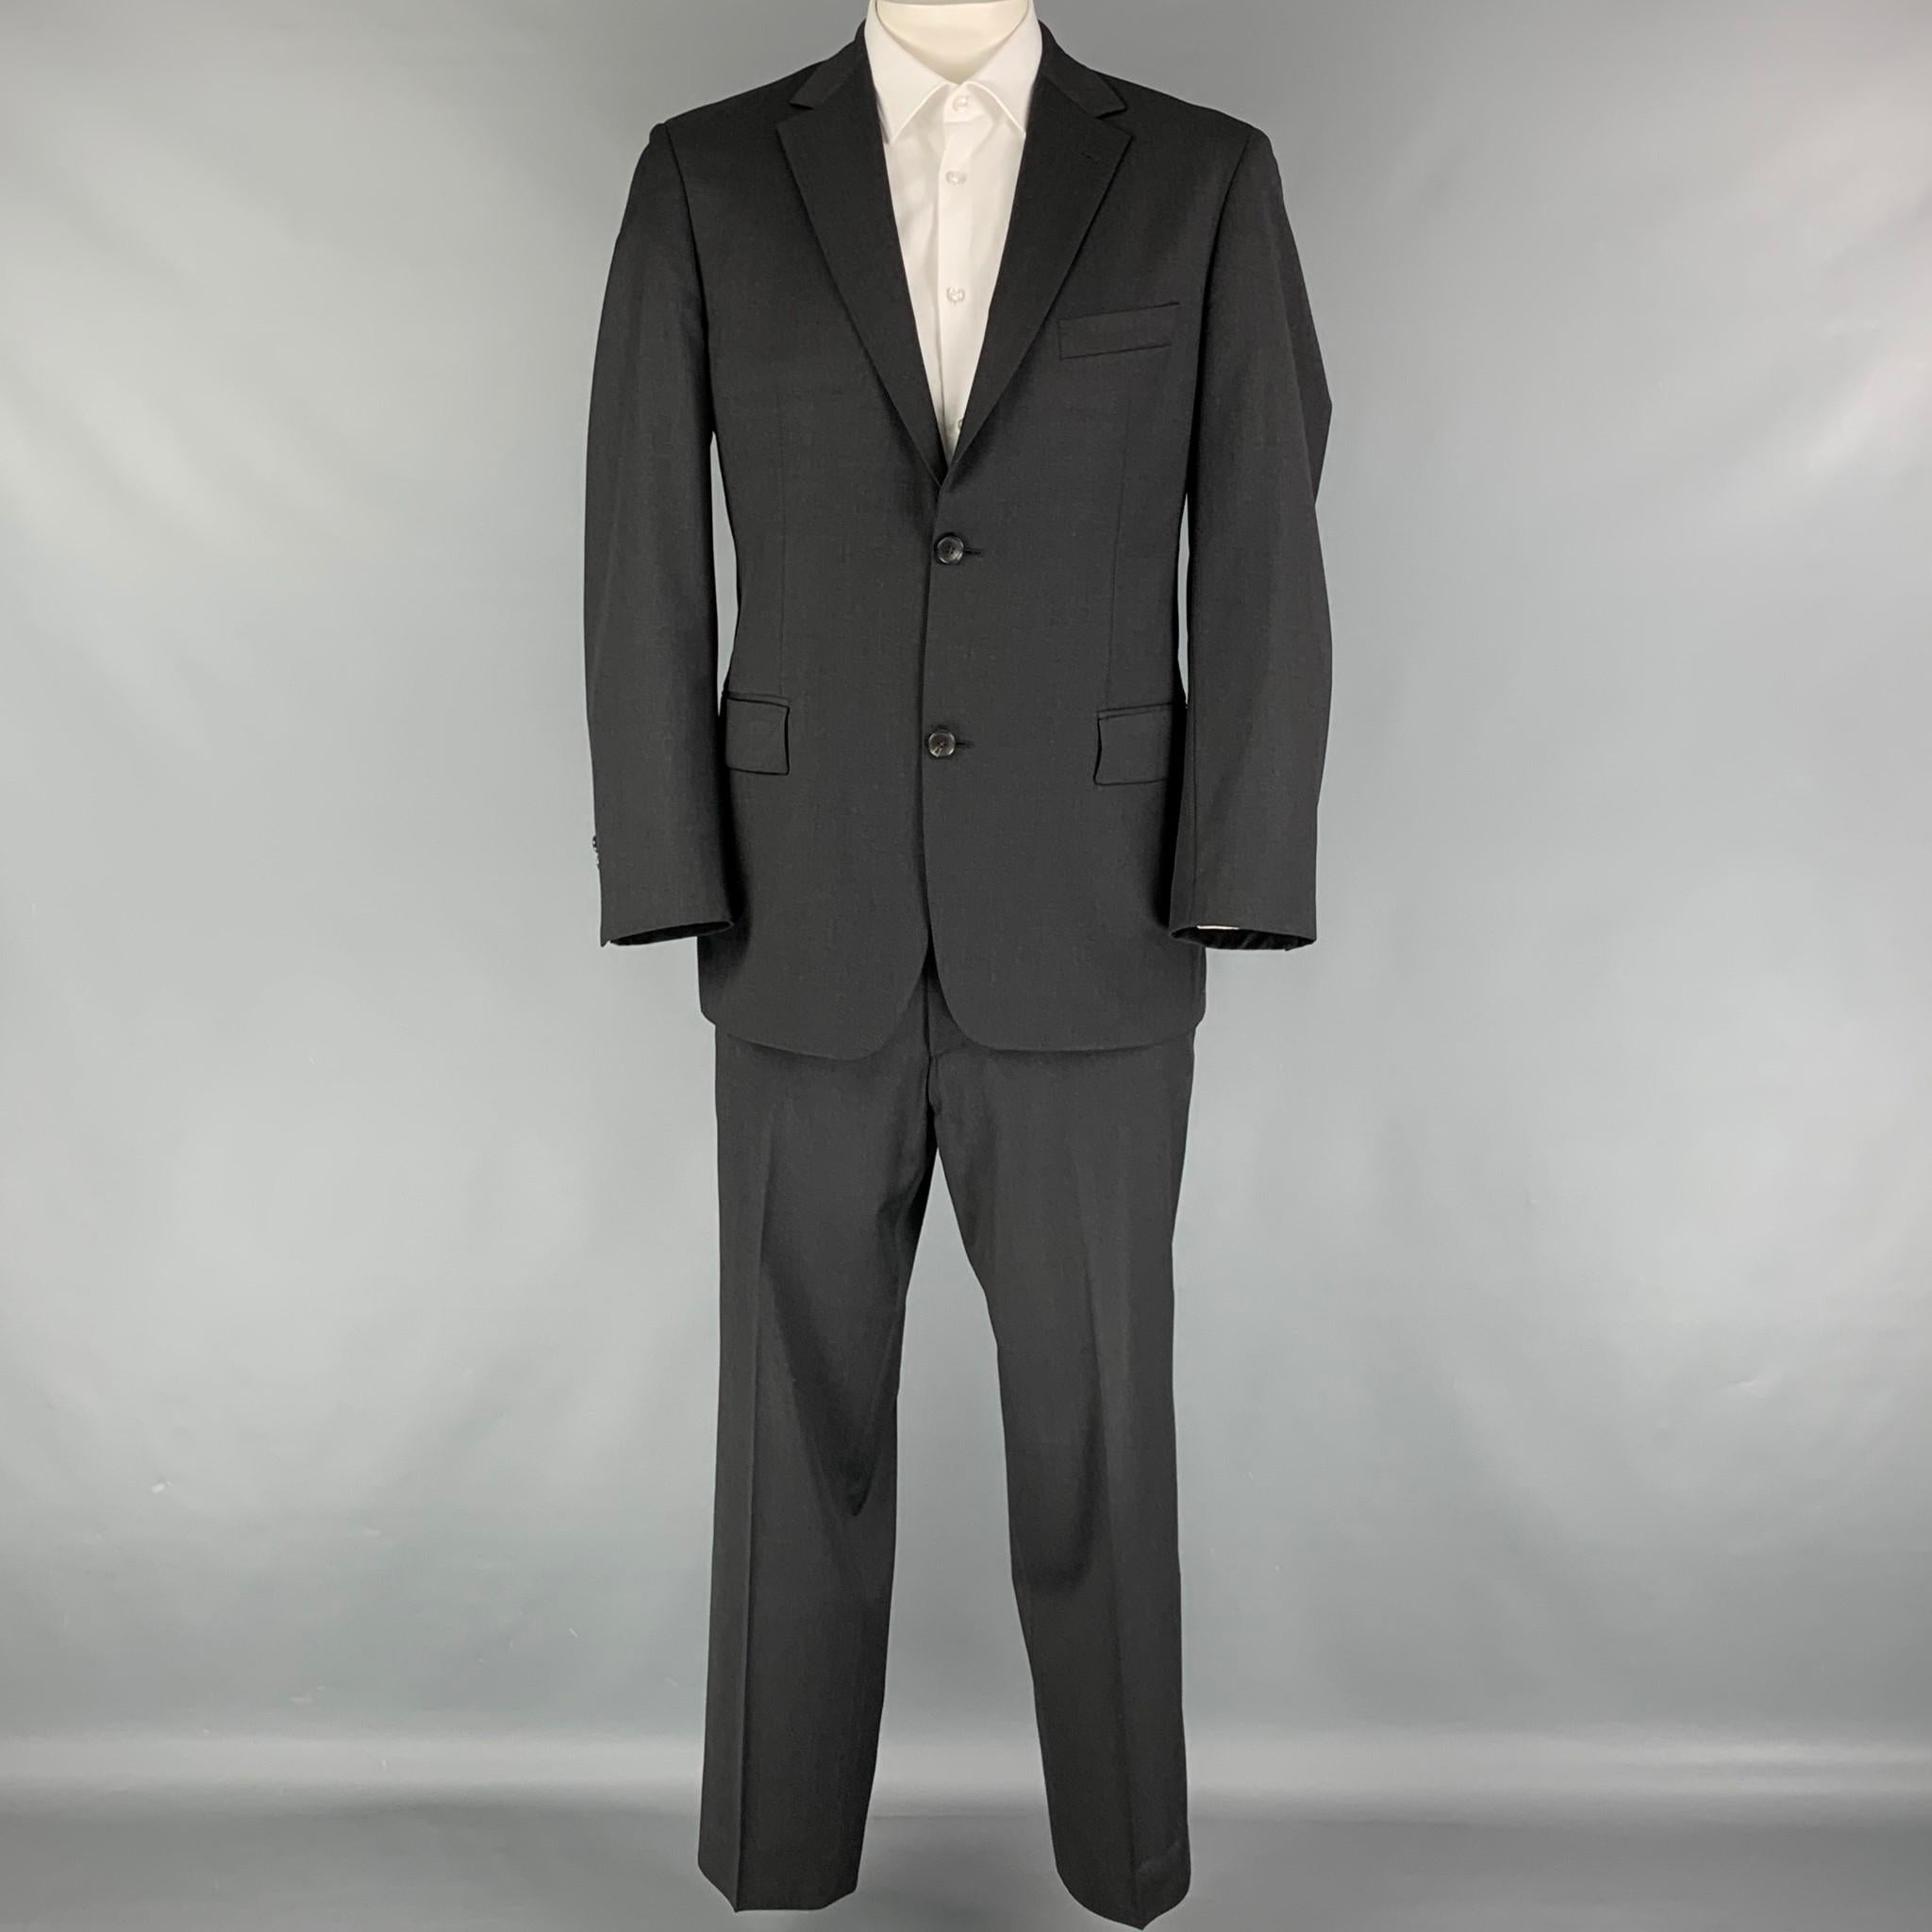 BOSS by HUGO BOSS suit comes in a charcoal virgin wool with a full liner and includes a single breasted, double button sport coat with a notch lapel and matching flat front trousers.

Very Good Pre-Owned Condition.
Marked: